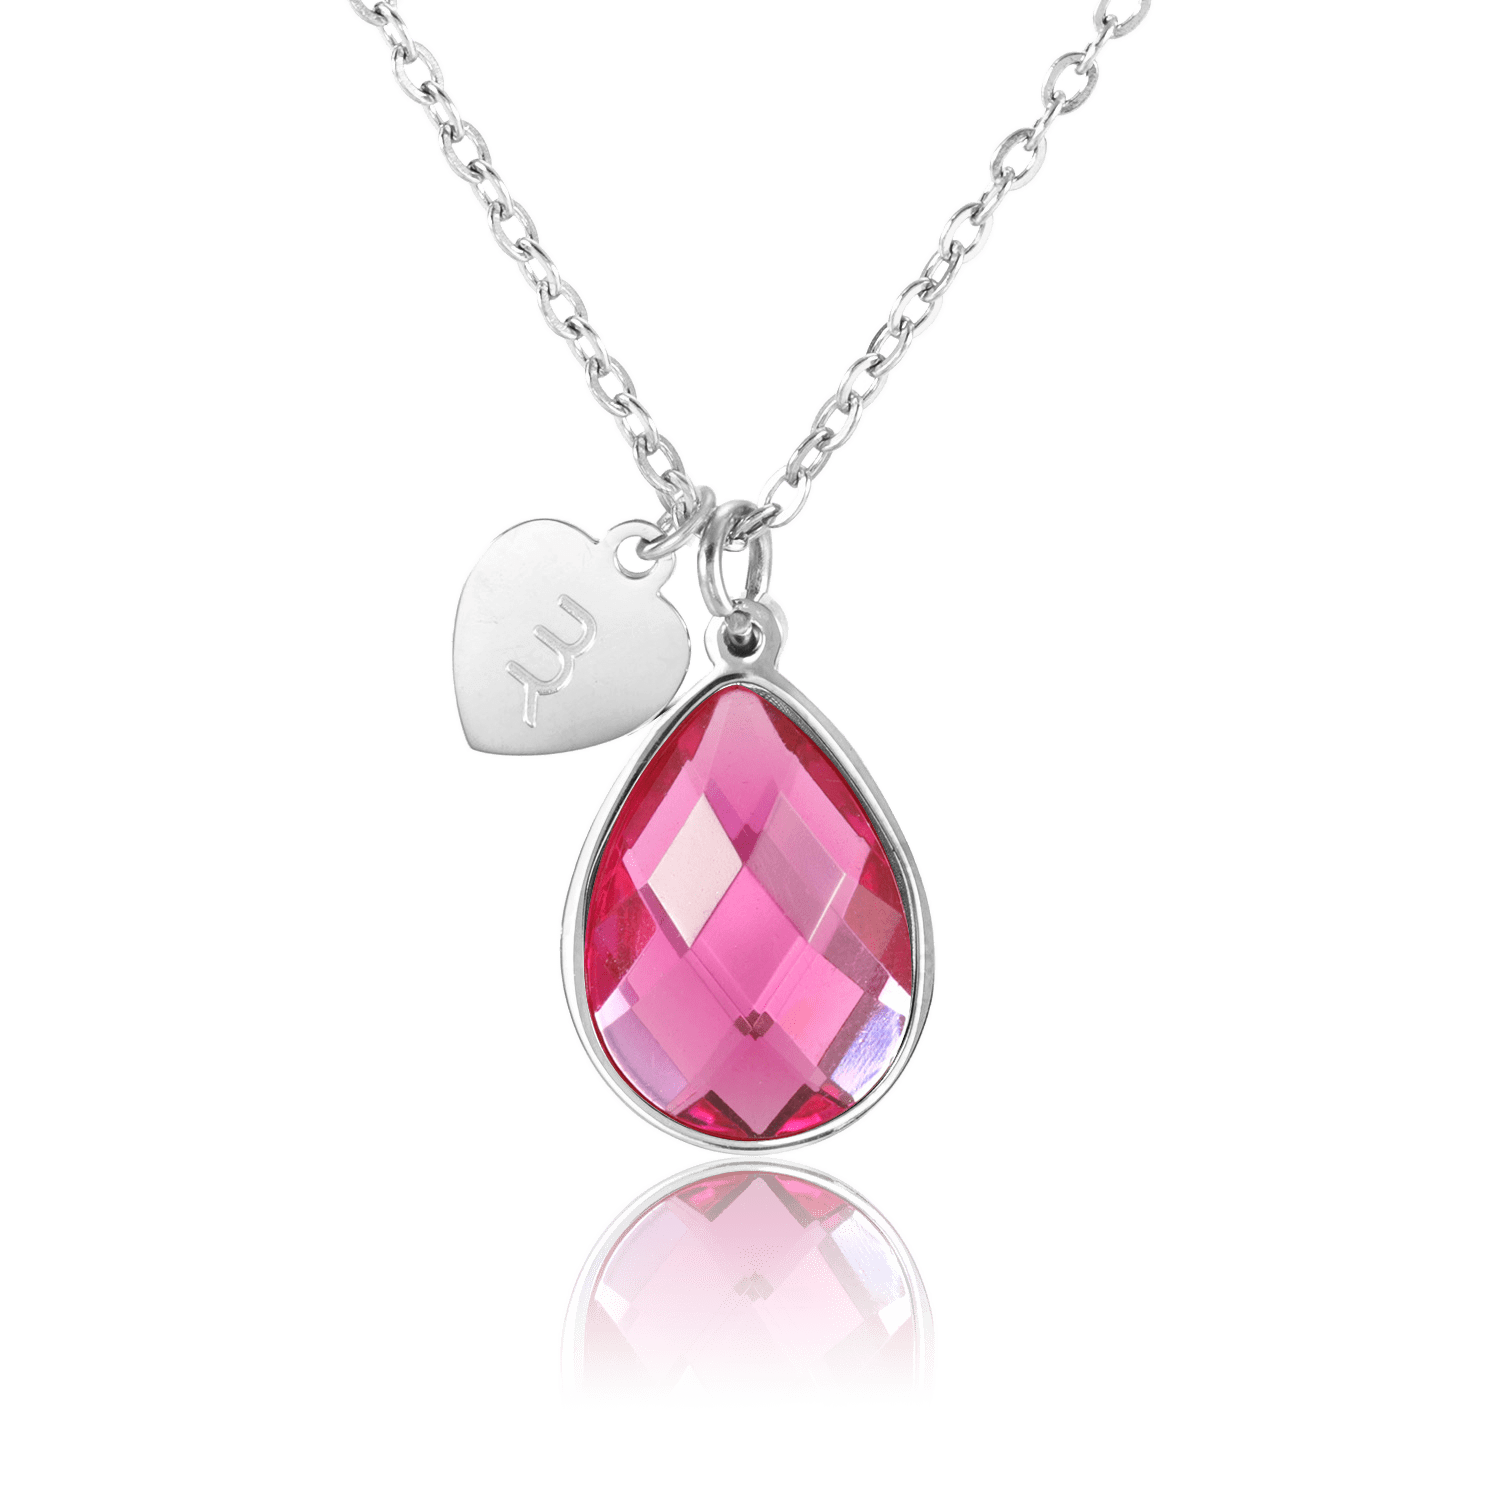 bianco rosso Necklaces Silver September Birthstone - Rose Quartz cyprus greece jewelry gift free shipping europe worldwide